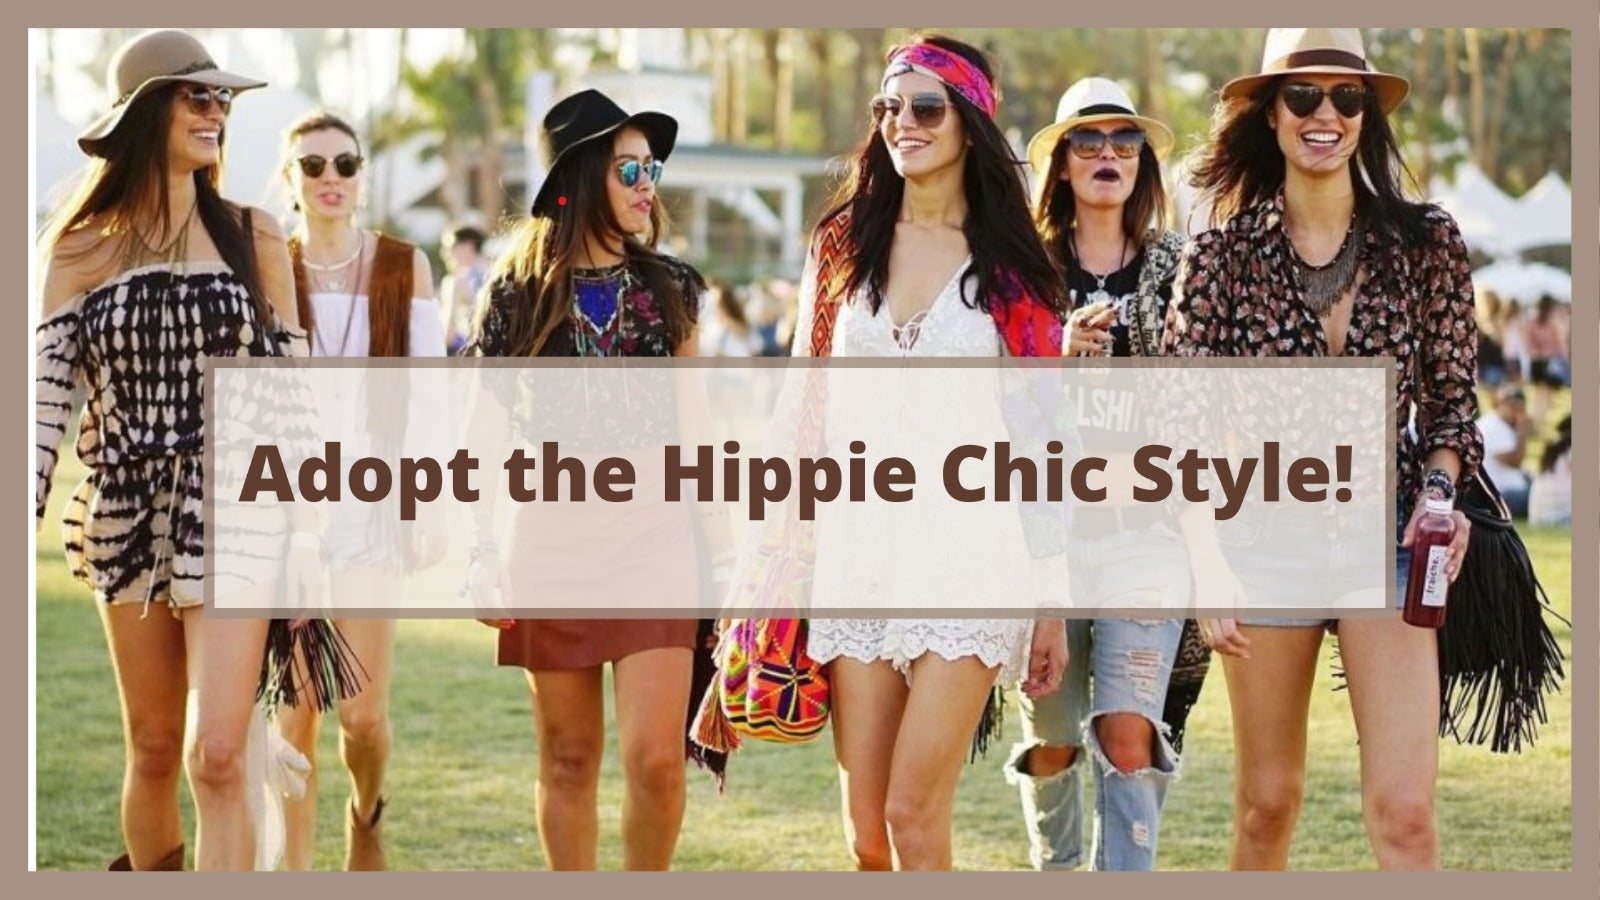 Adopt the Hippie Chic Style!